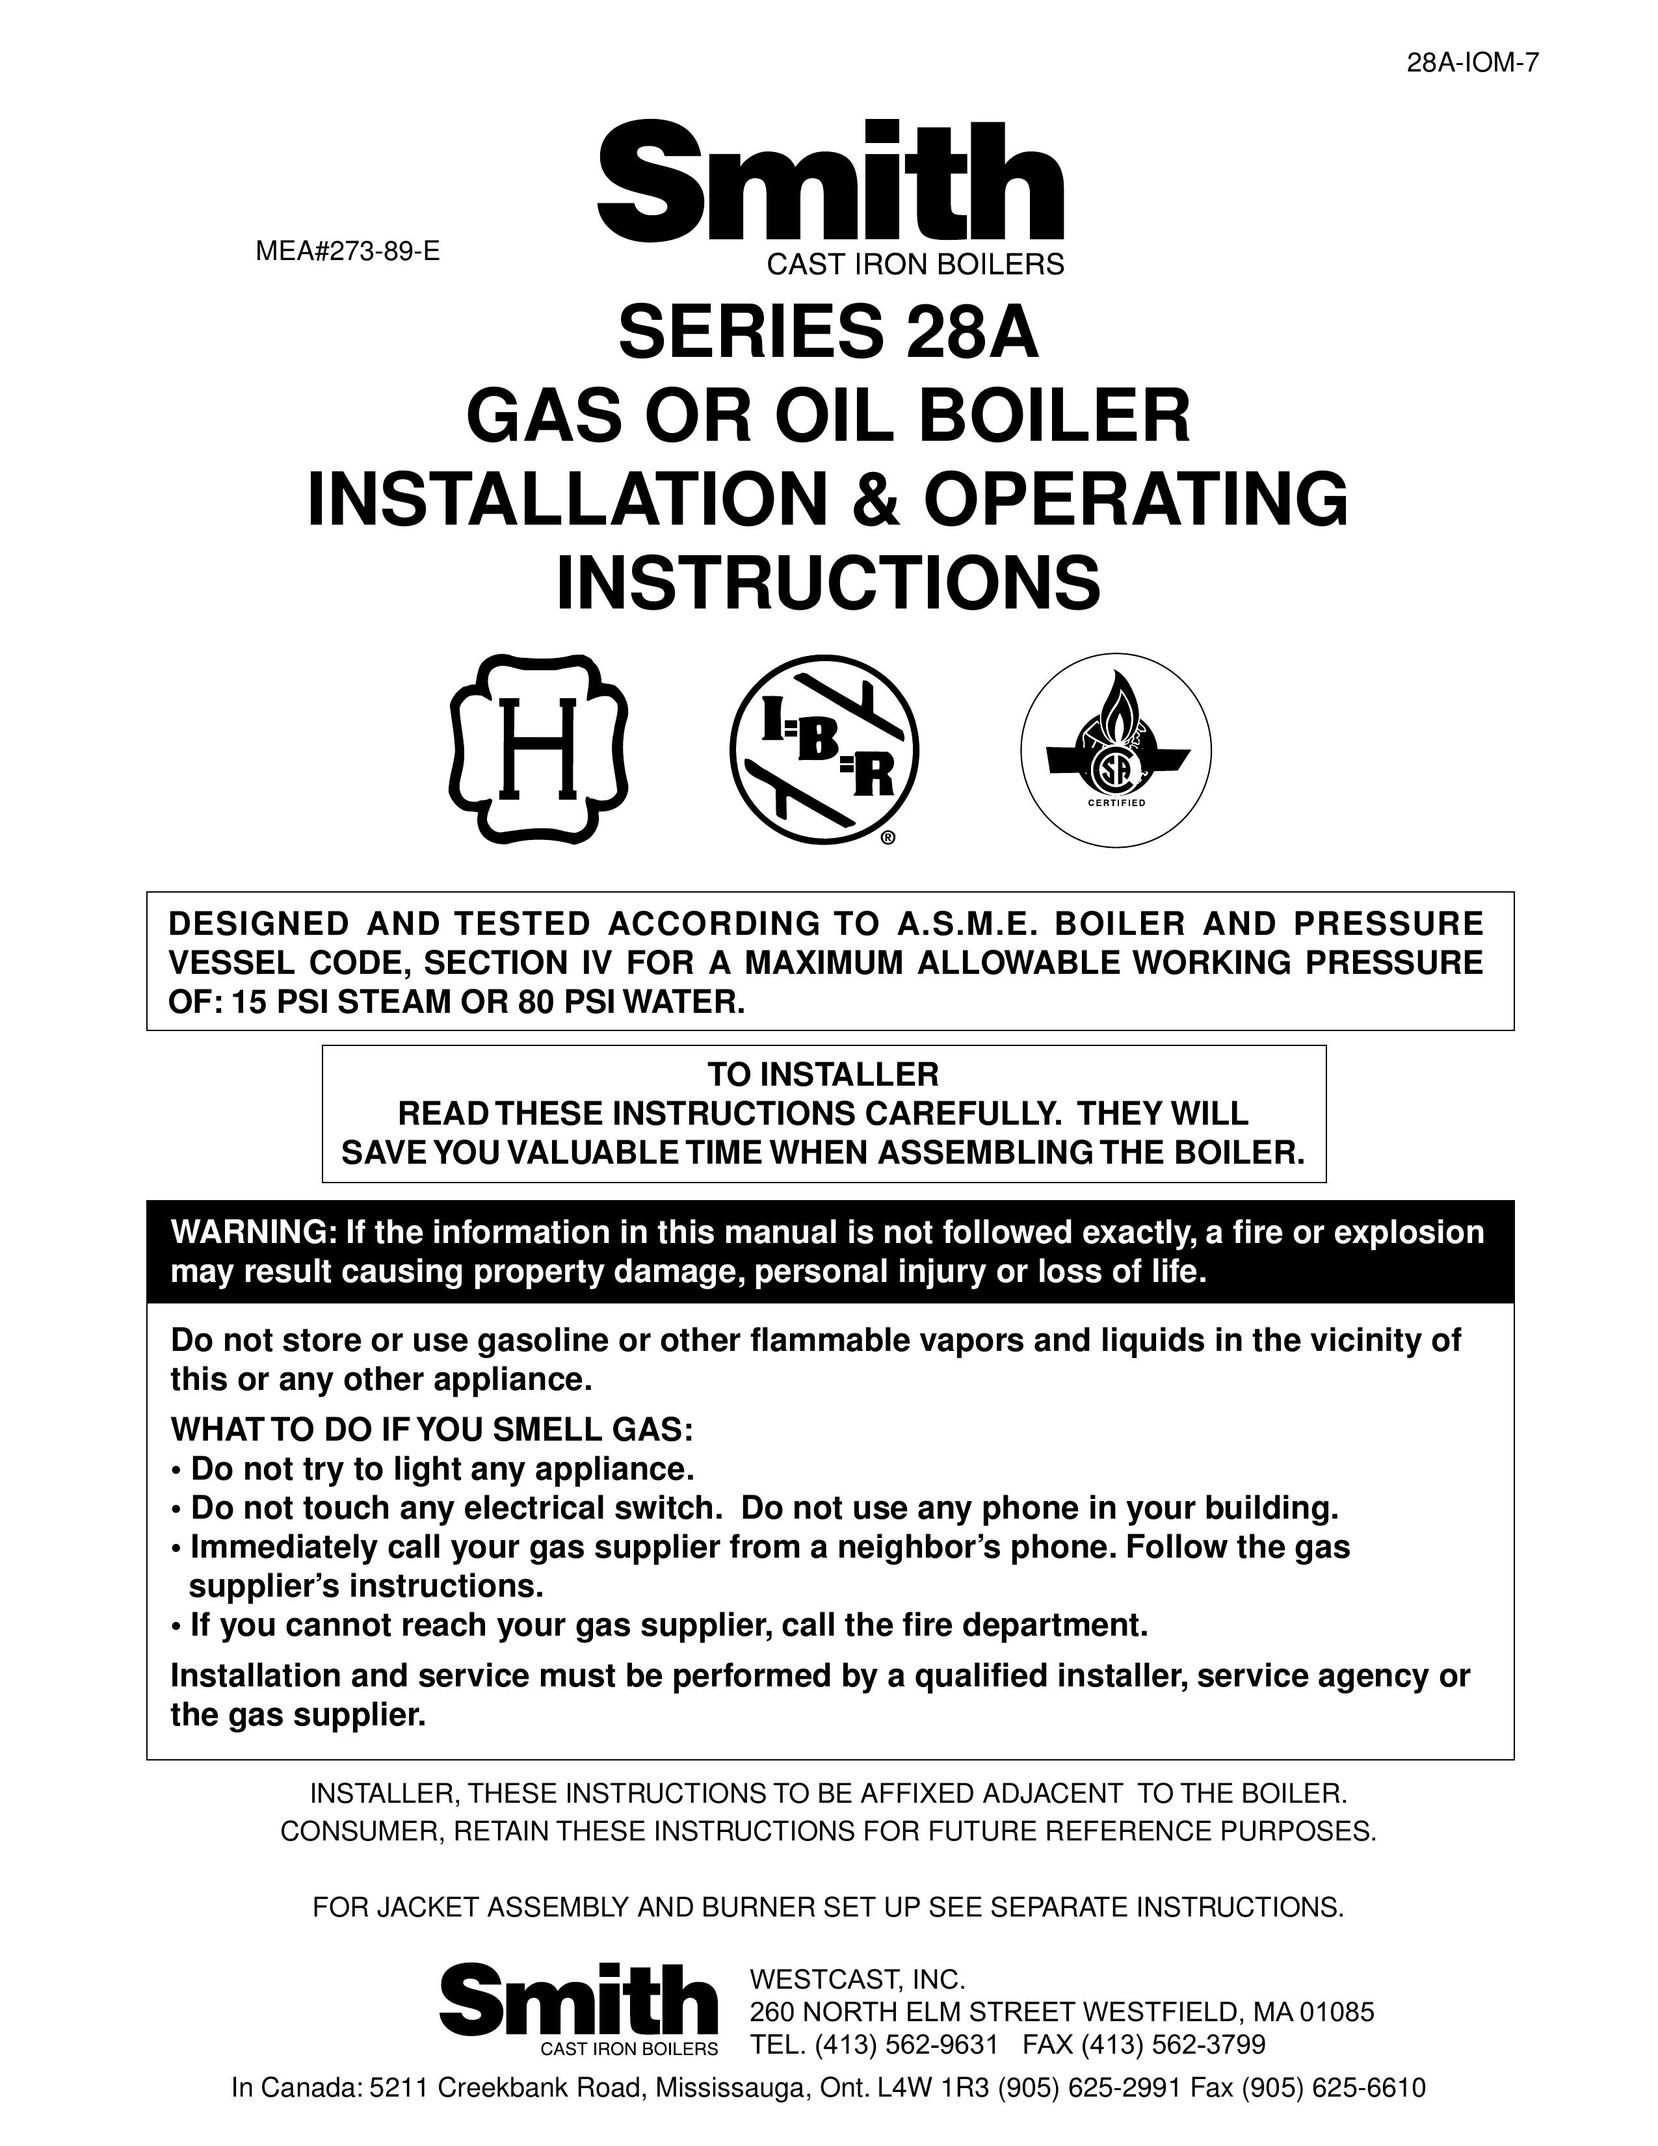 Smith Cast Iron Boilers Series 28A Boiler User Manual